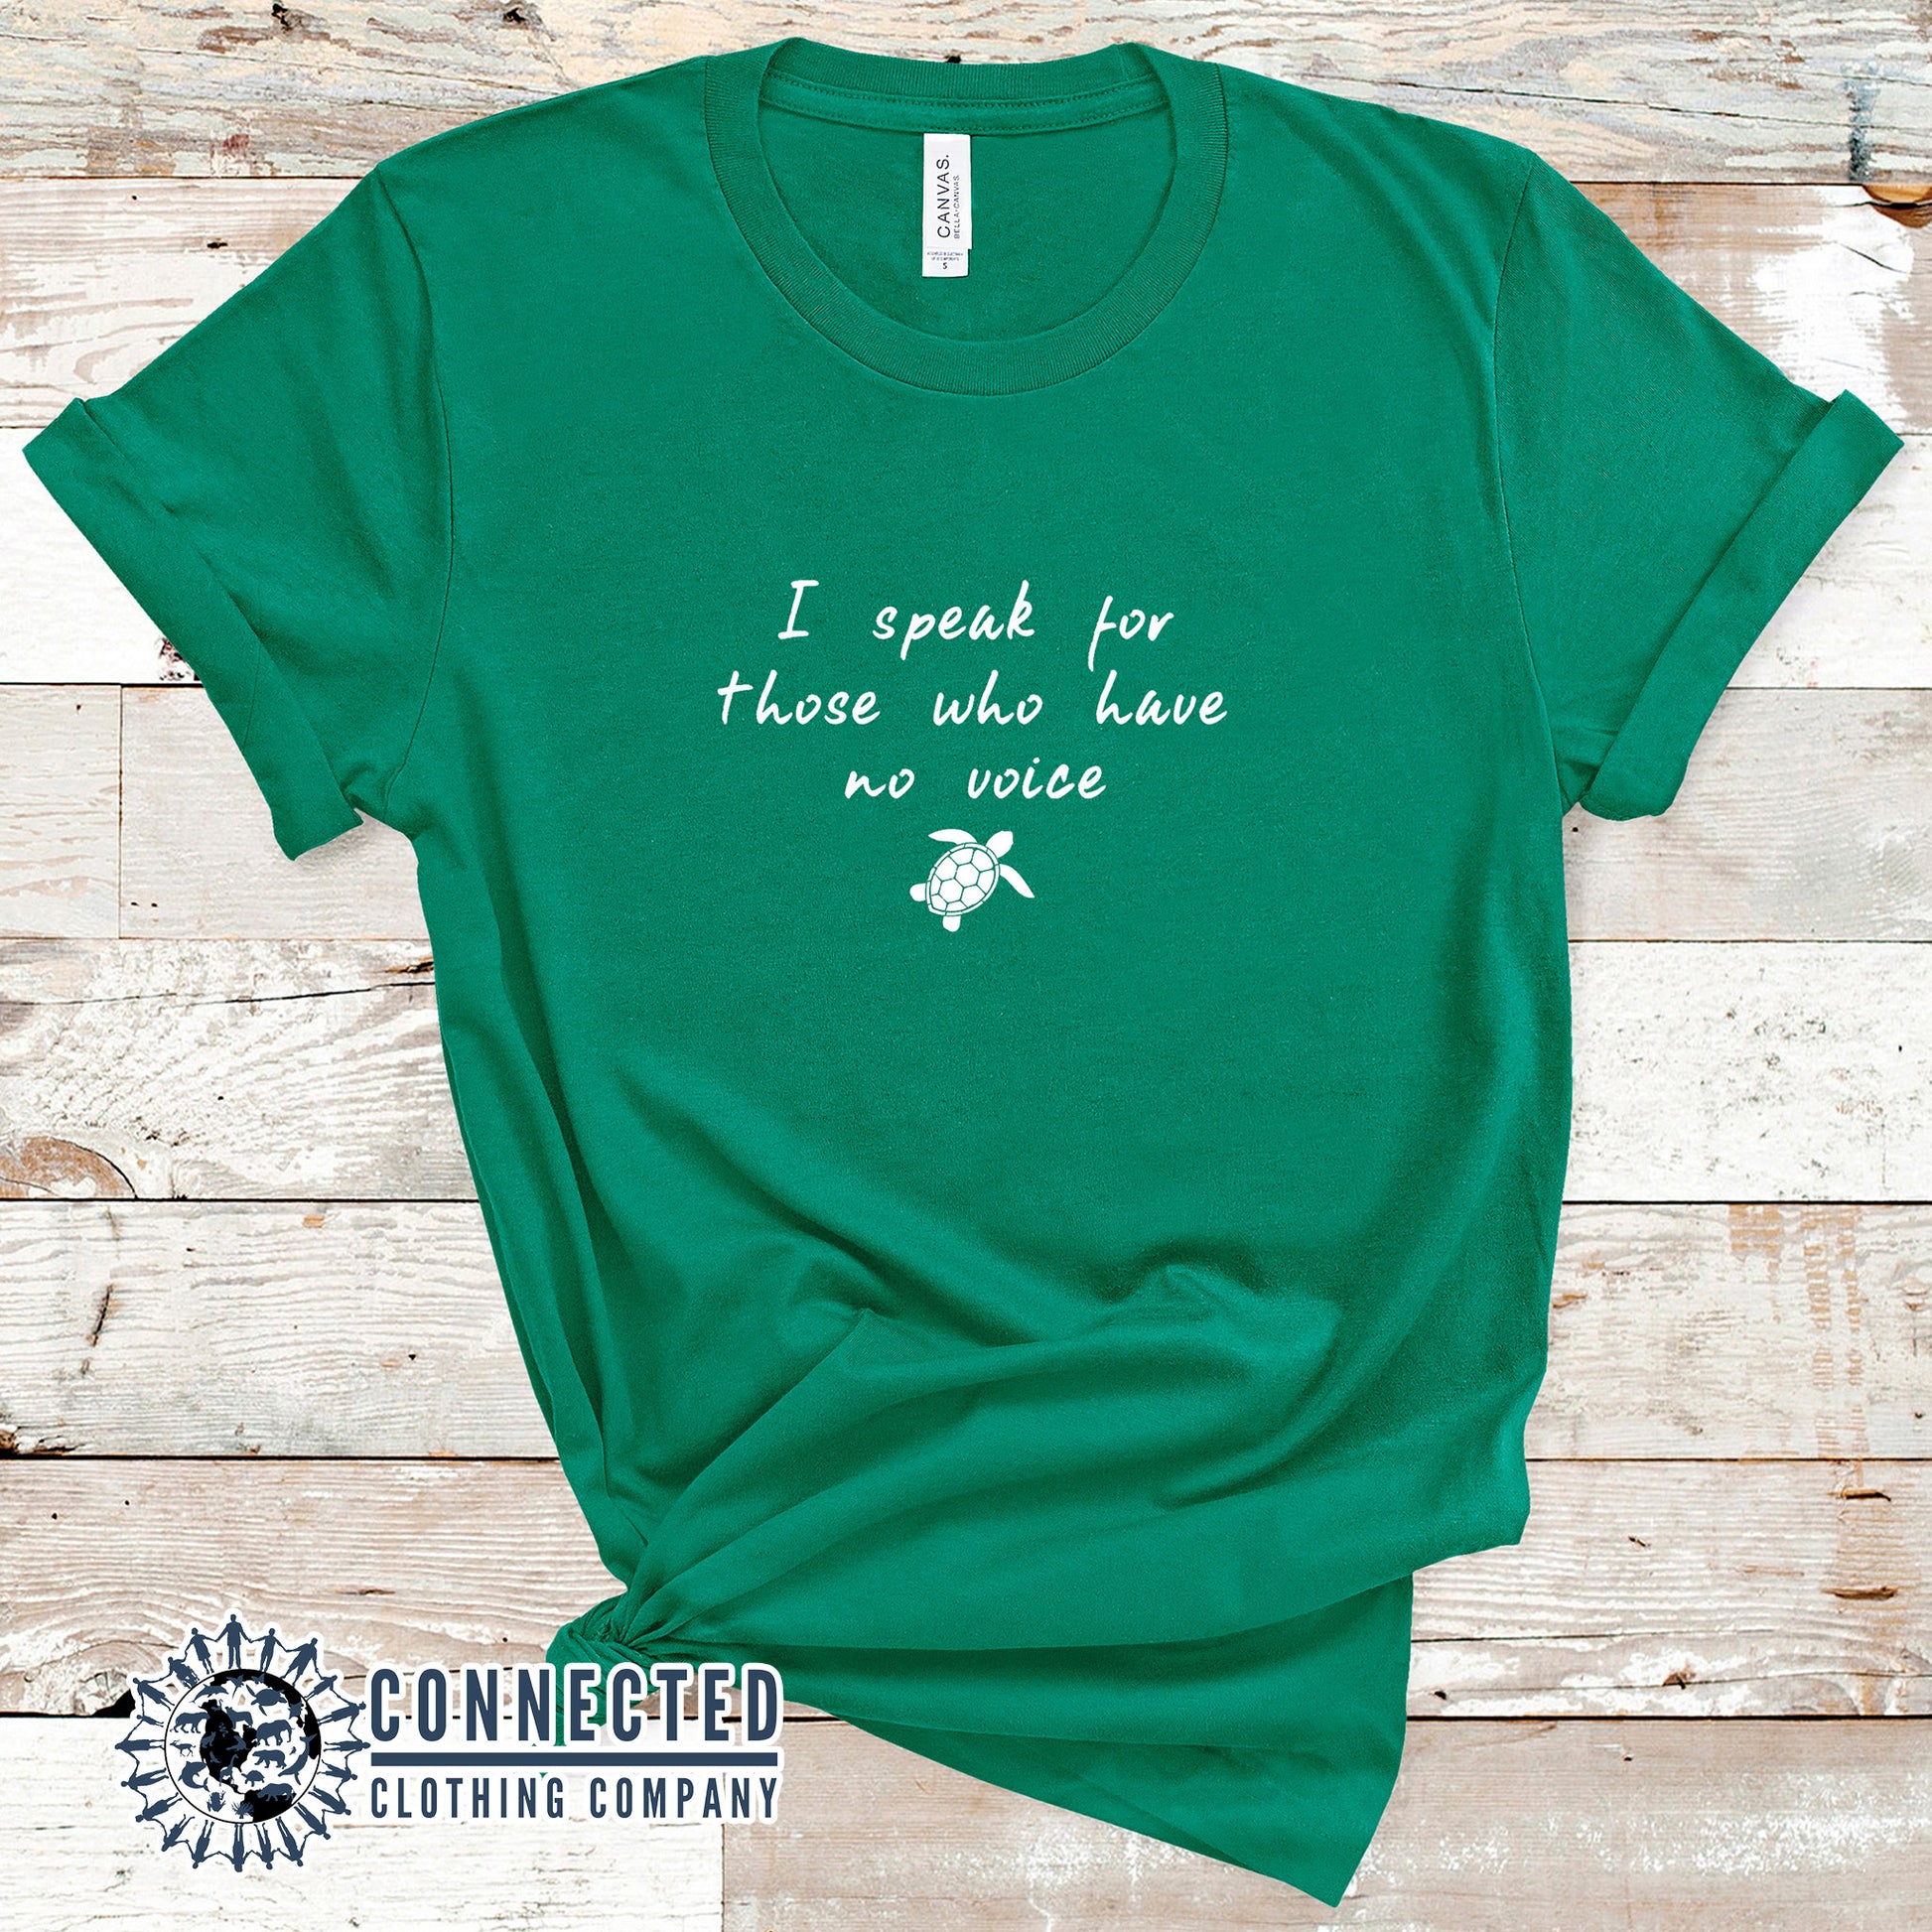 Kelly Green Be The Voice Sea Turtle Tee reads "I speak for those who have no voice." - sweetsherriloudesigns - Ethically and Sustainably Made - 10% donated to the Sea Turtle Conservancy